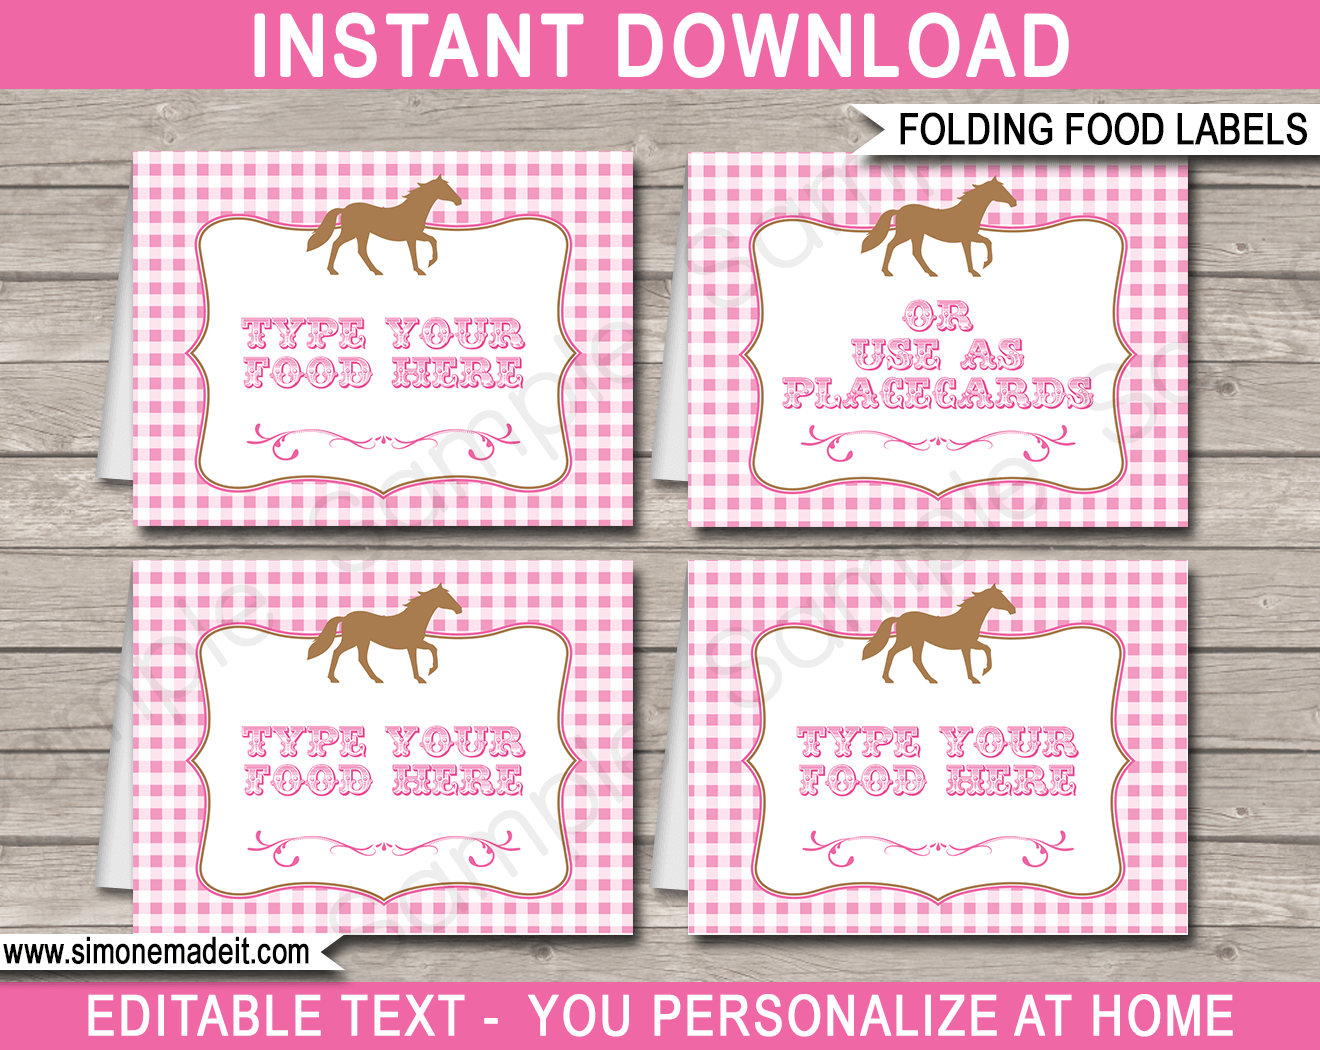 Horse Party Food Labels | Food Buffet Tags | Place Cards | Pony or Horse Theme Birthday Party | Editable & Printable DIY Template | Instant Download via SIMONEmadeit.com